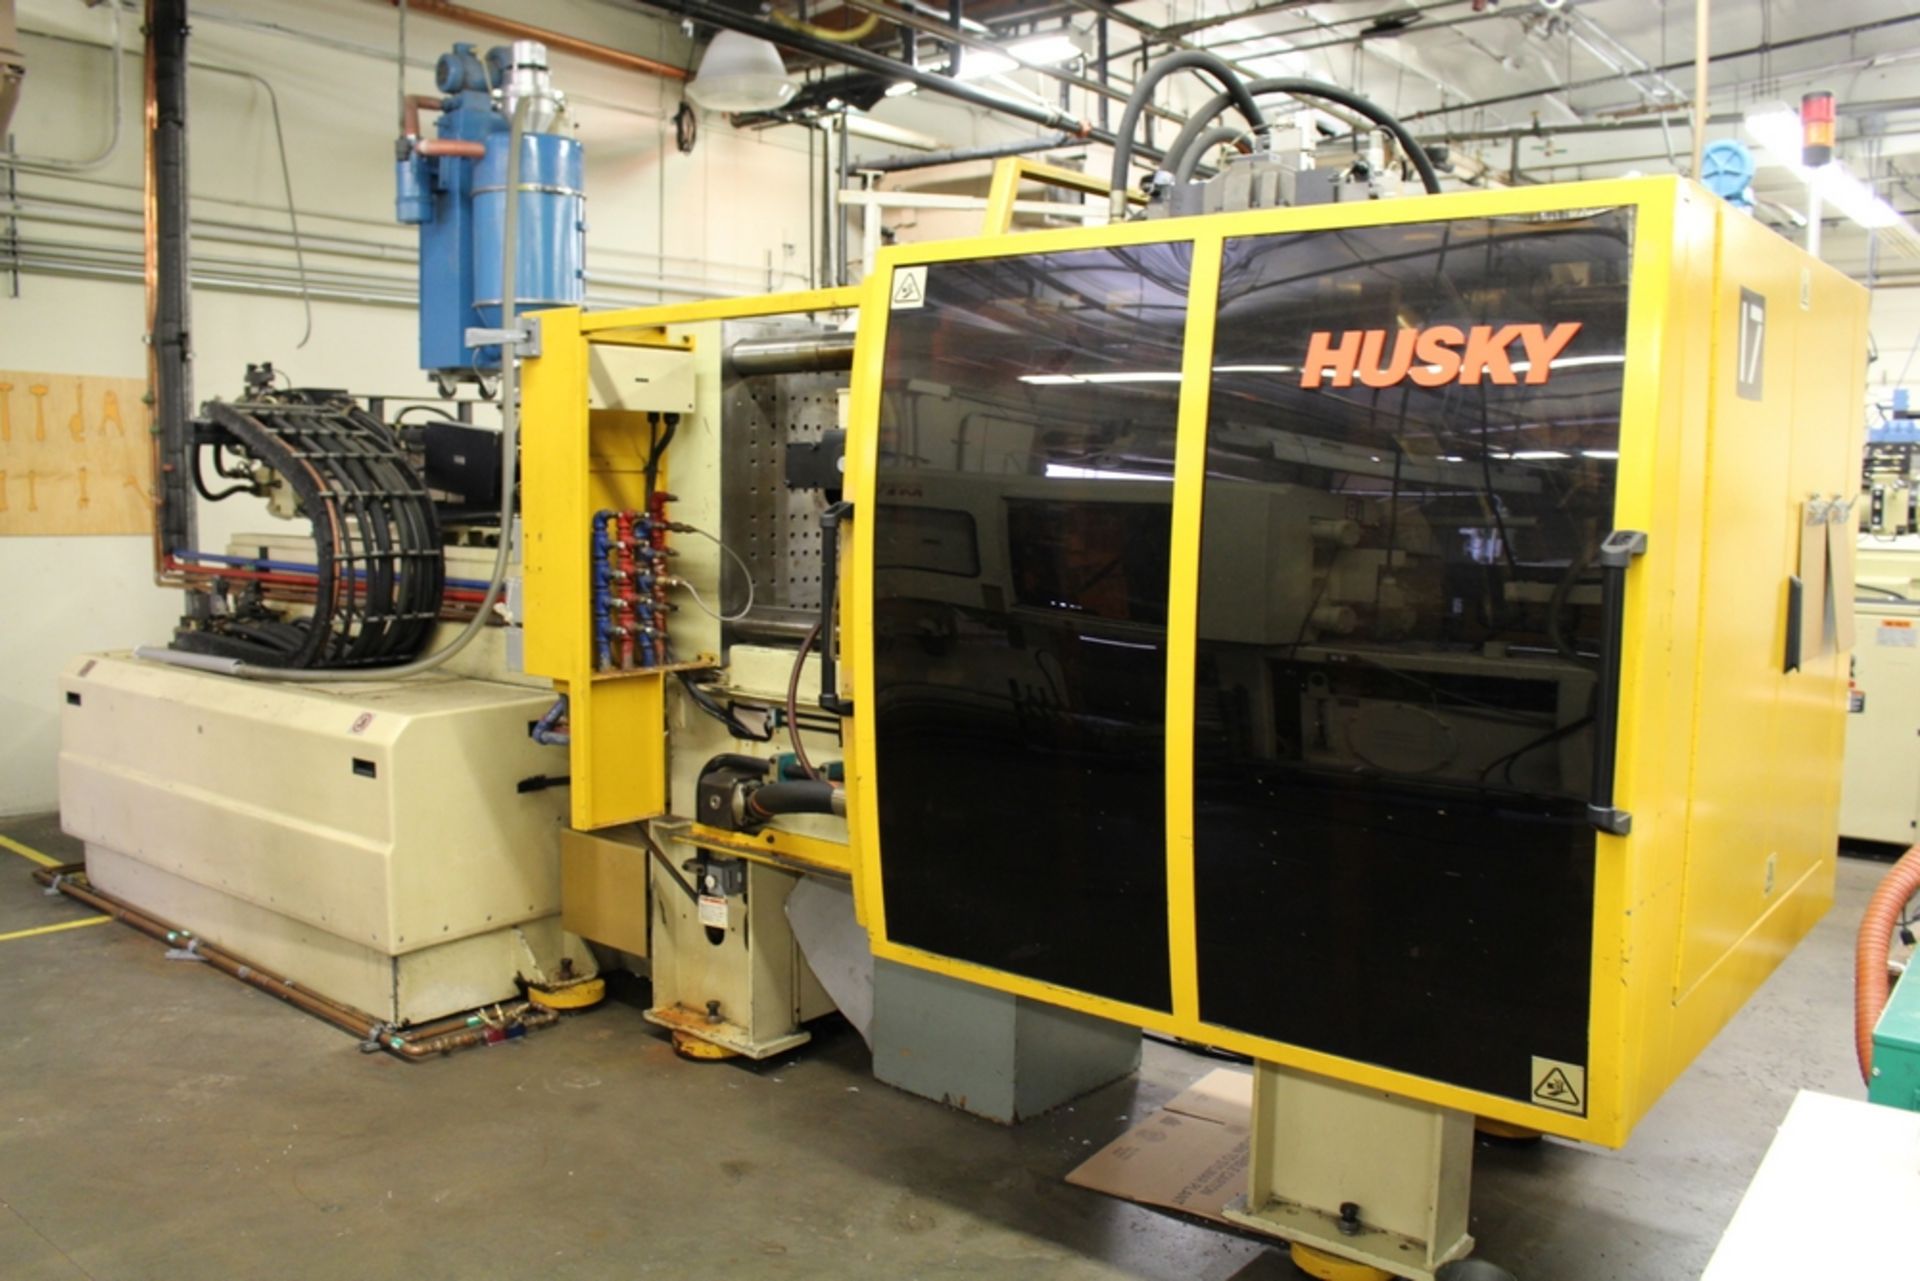 1995 HUSKY 225-TON INJECTION MOLDING MACHINE, MODEL G225GEN-RS50/50, S/N 12287, GE FANUC CONTROL, - Image 7 of 7